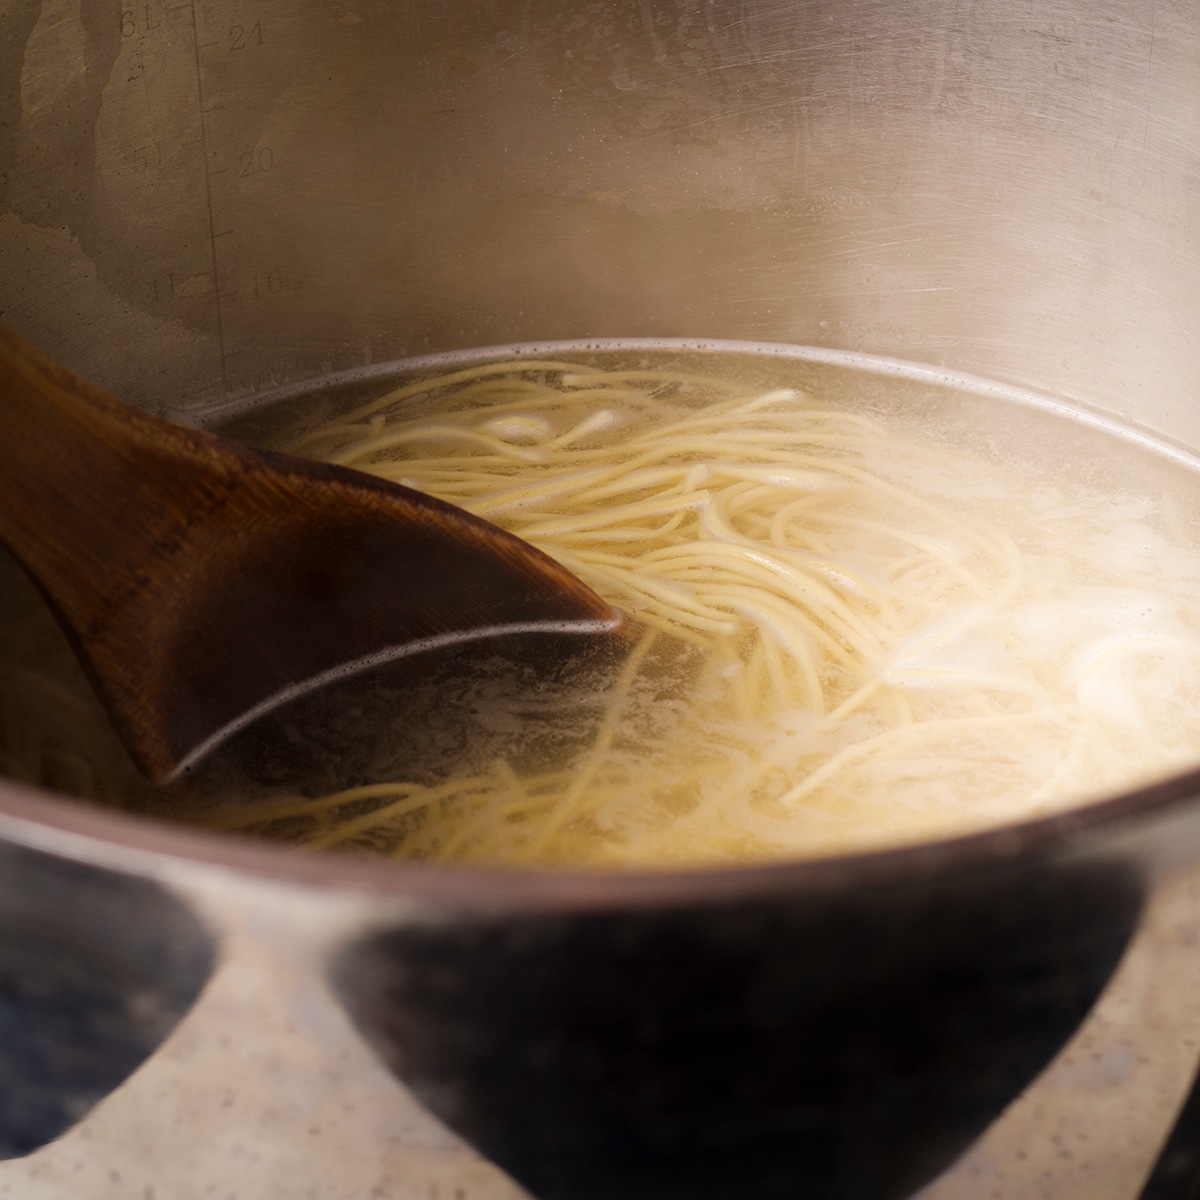 Spaghetti noodles simmering in a pot of salt water.